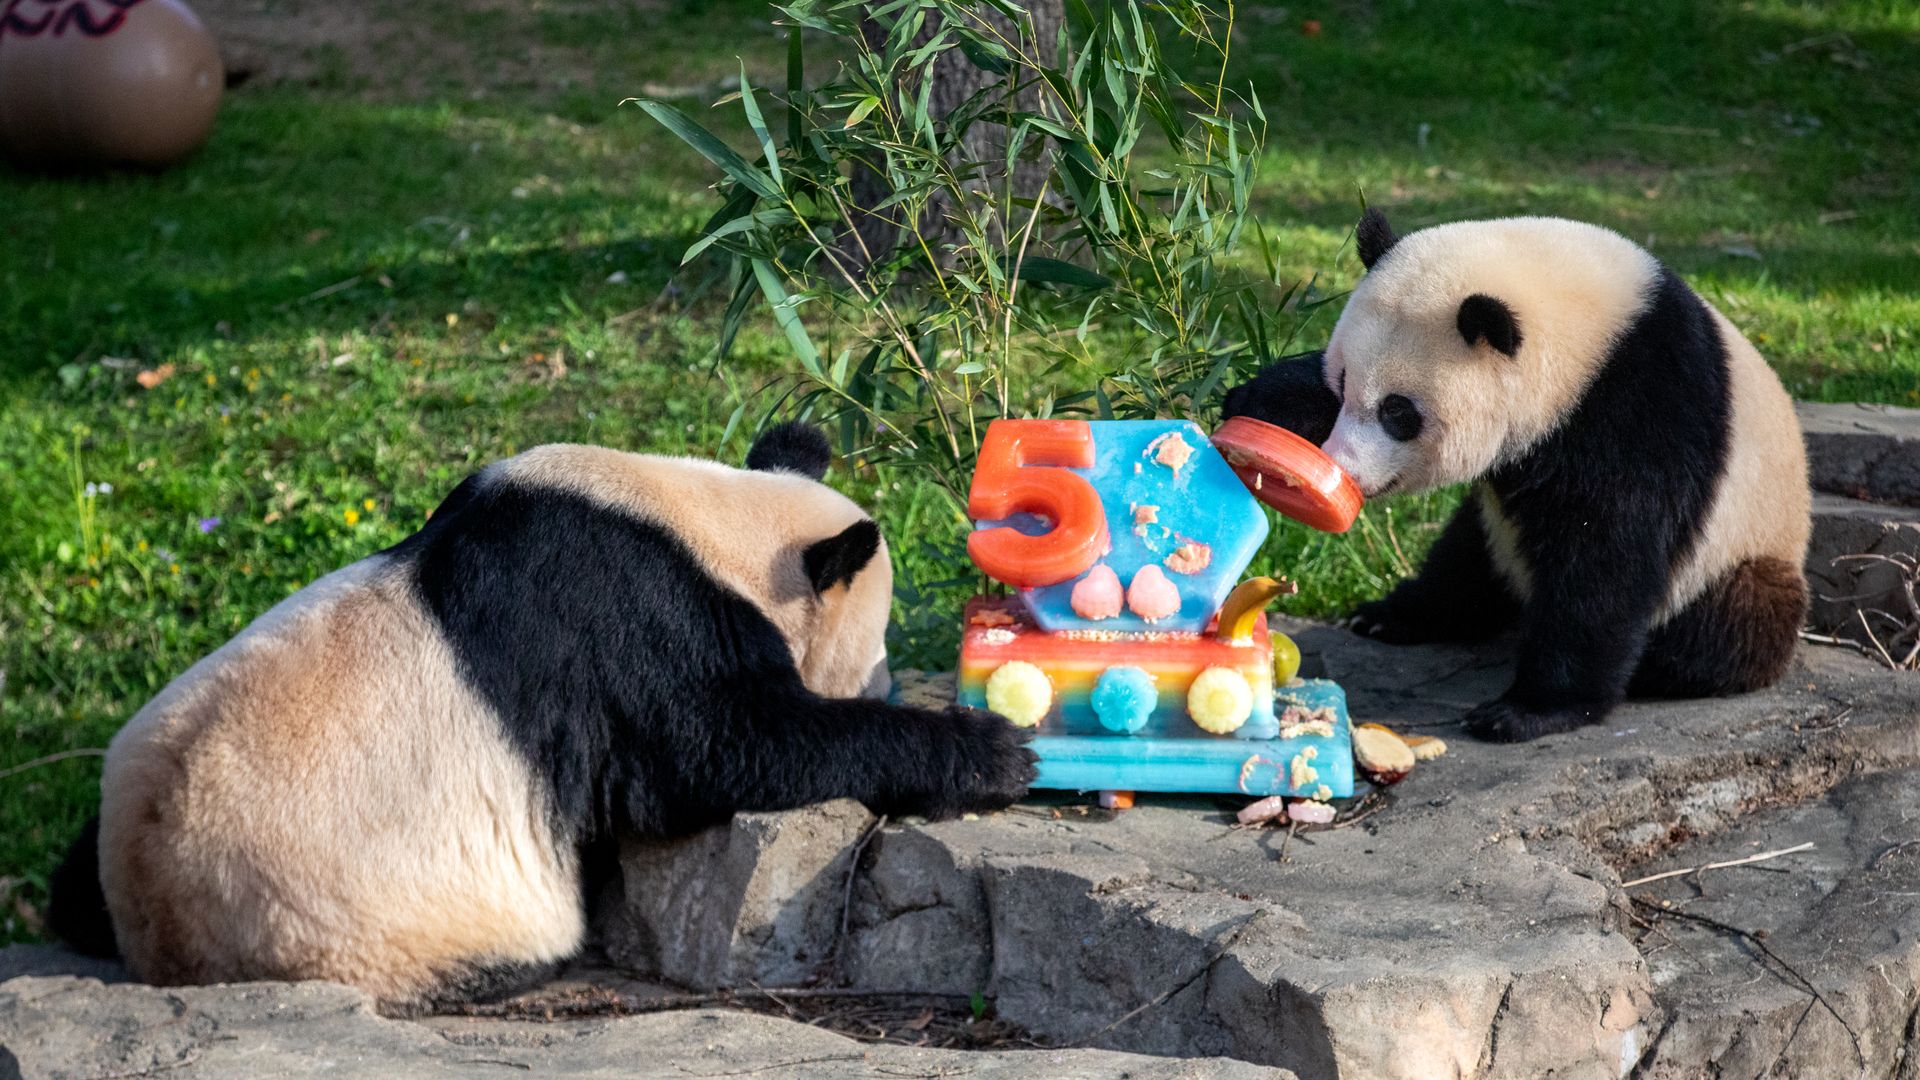 Pandas are seen eating an ice cake on the 50th anniversary of China's gift of the animals to the United States.